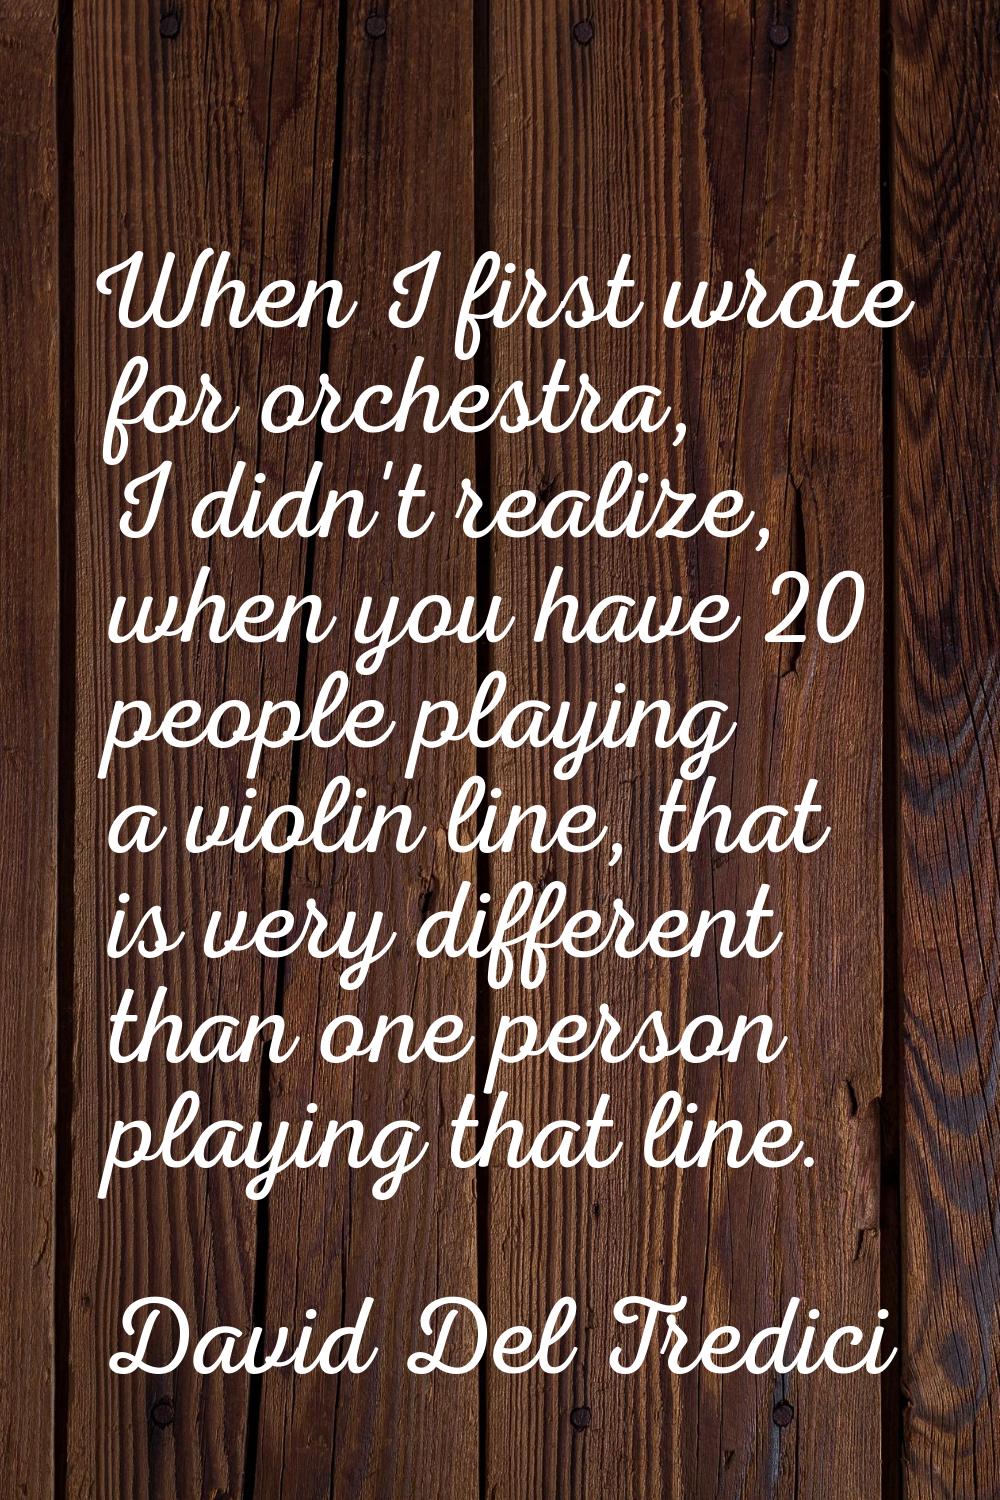 When I first wrote for orchestra, I didn't realize, when you have 20 people playing a violin line, 